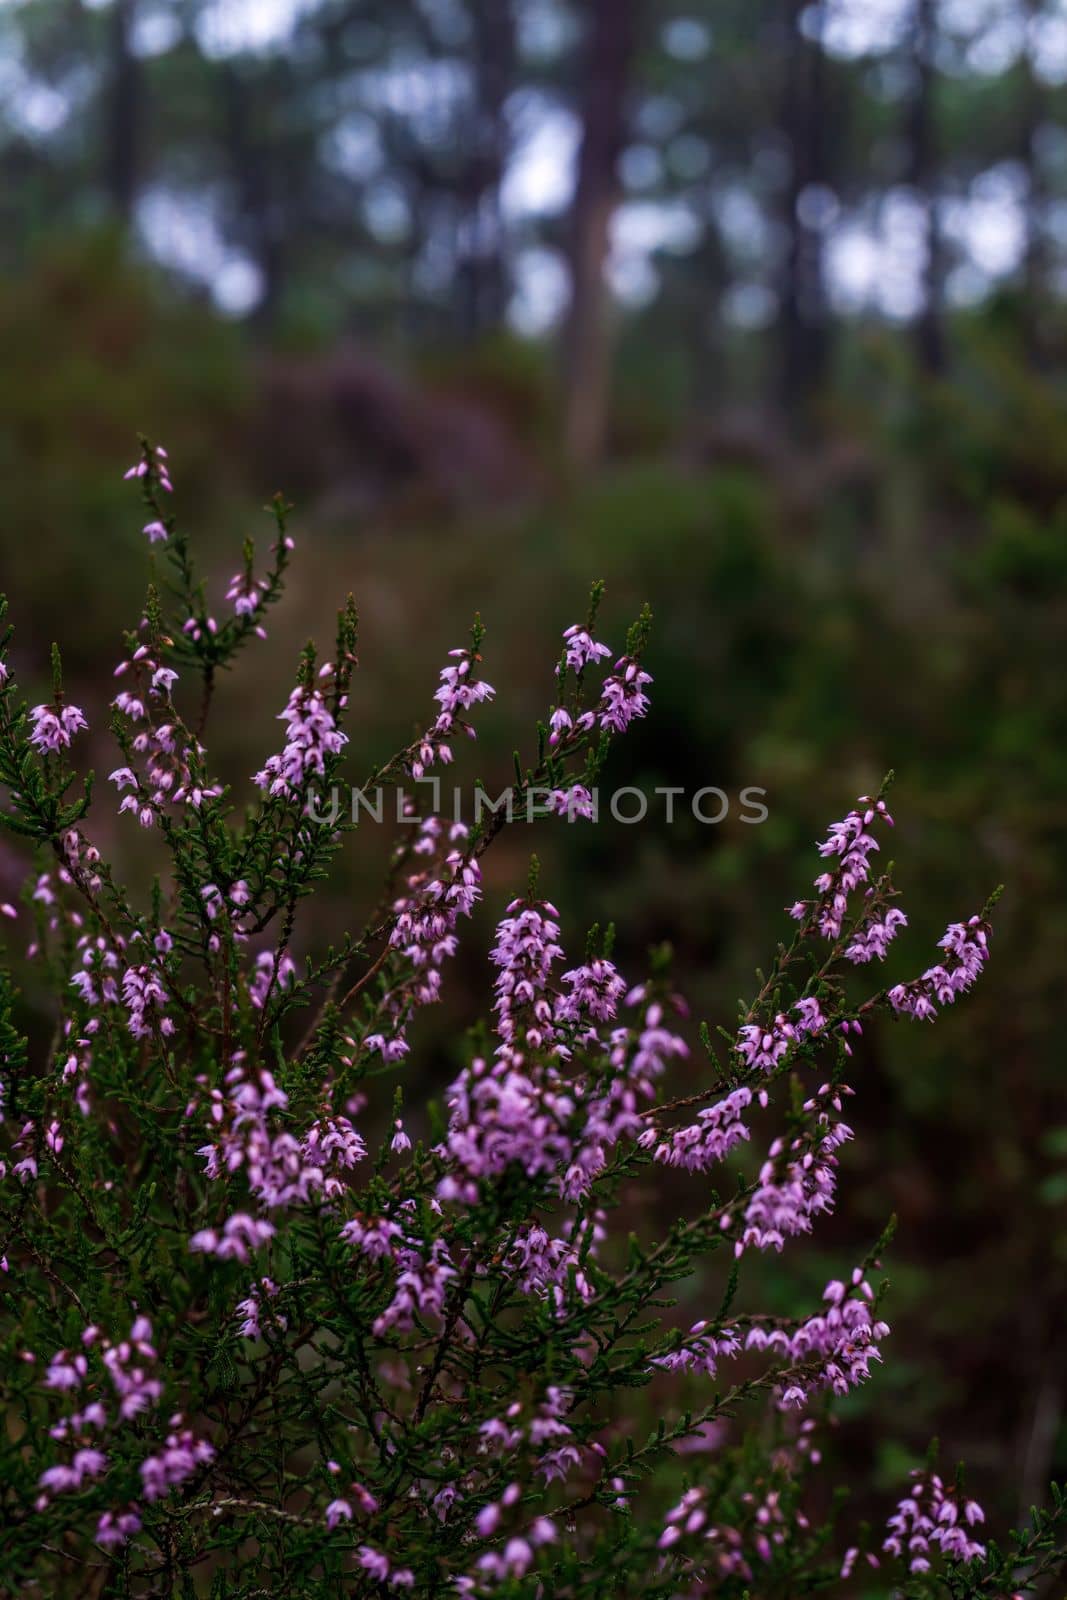 Gentle pink heather flowers in a forest close up